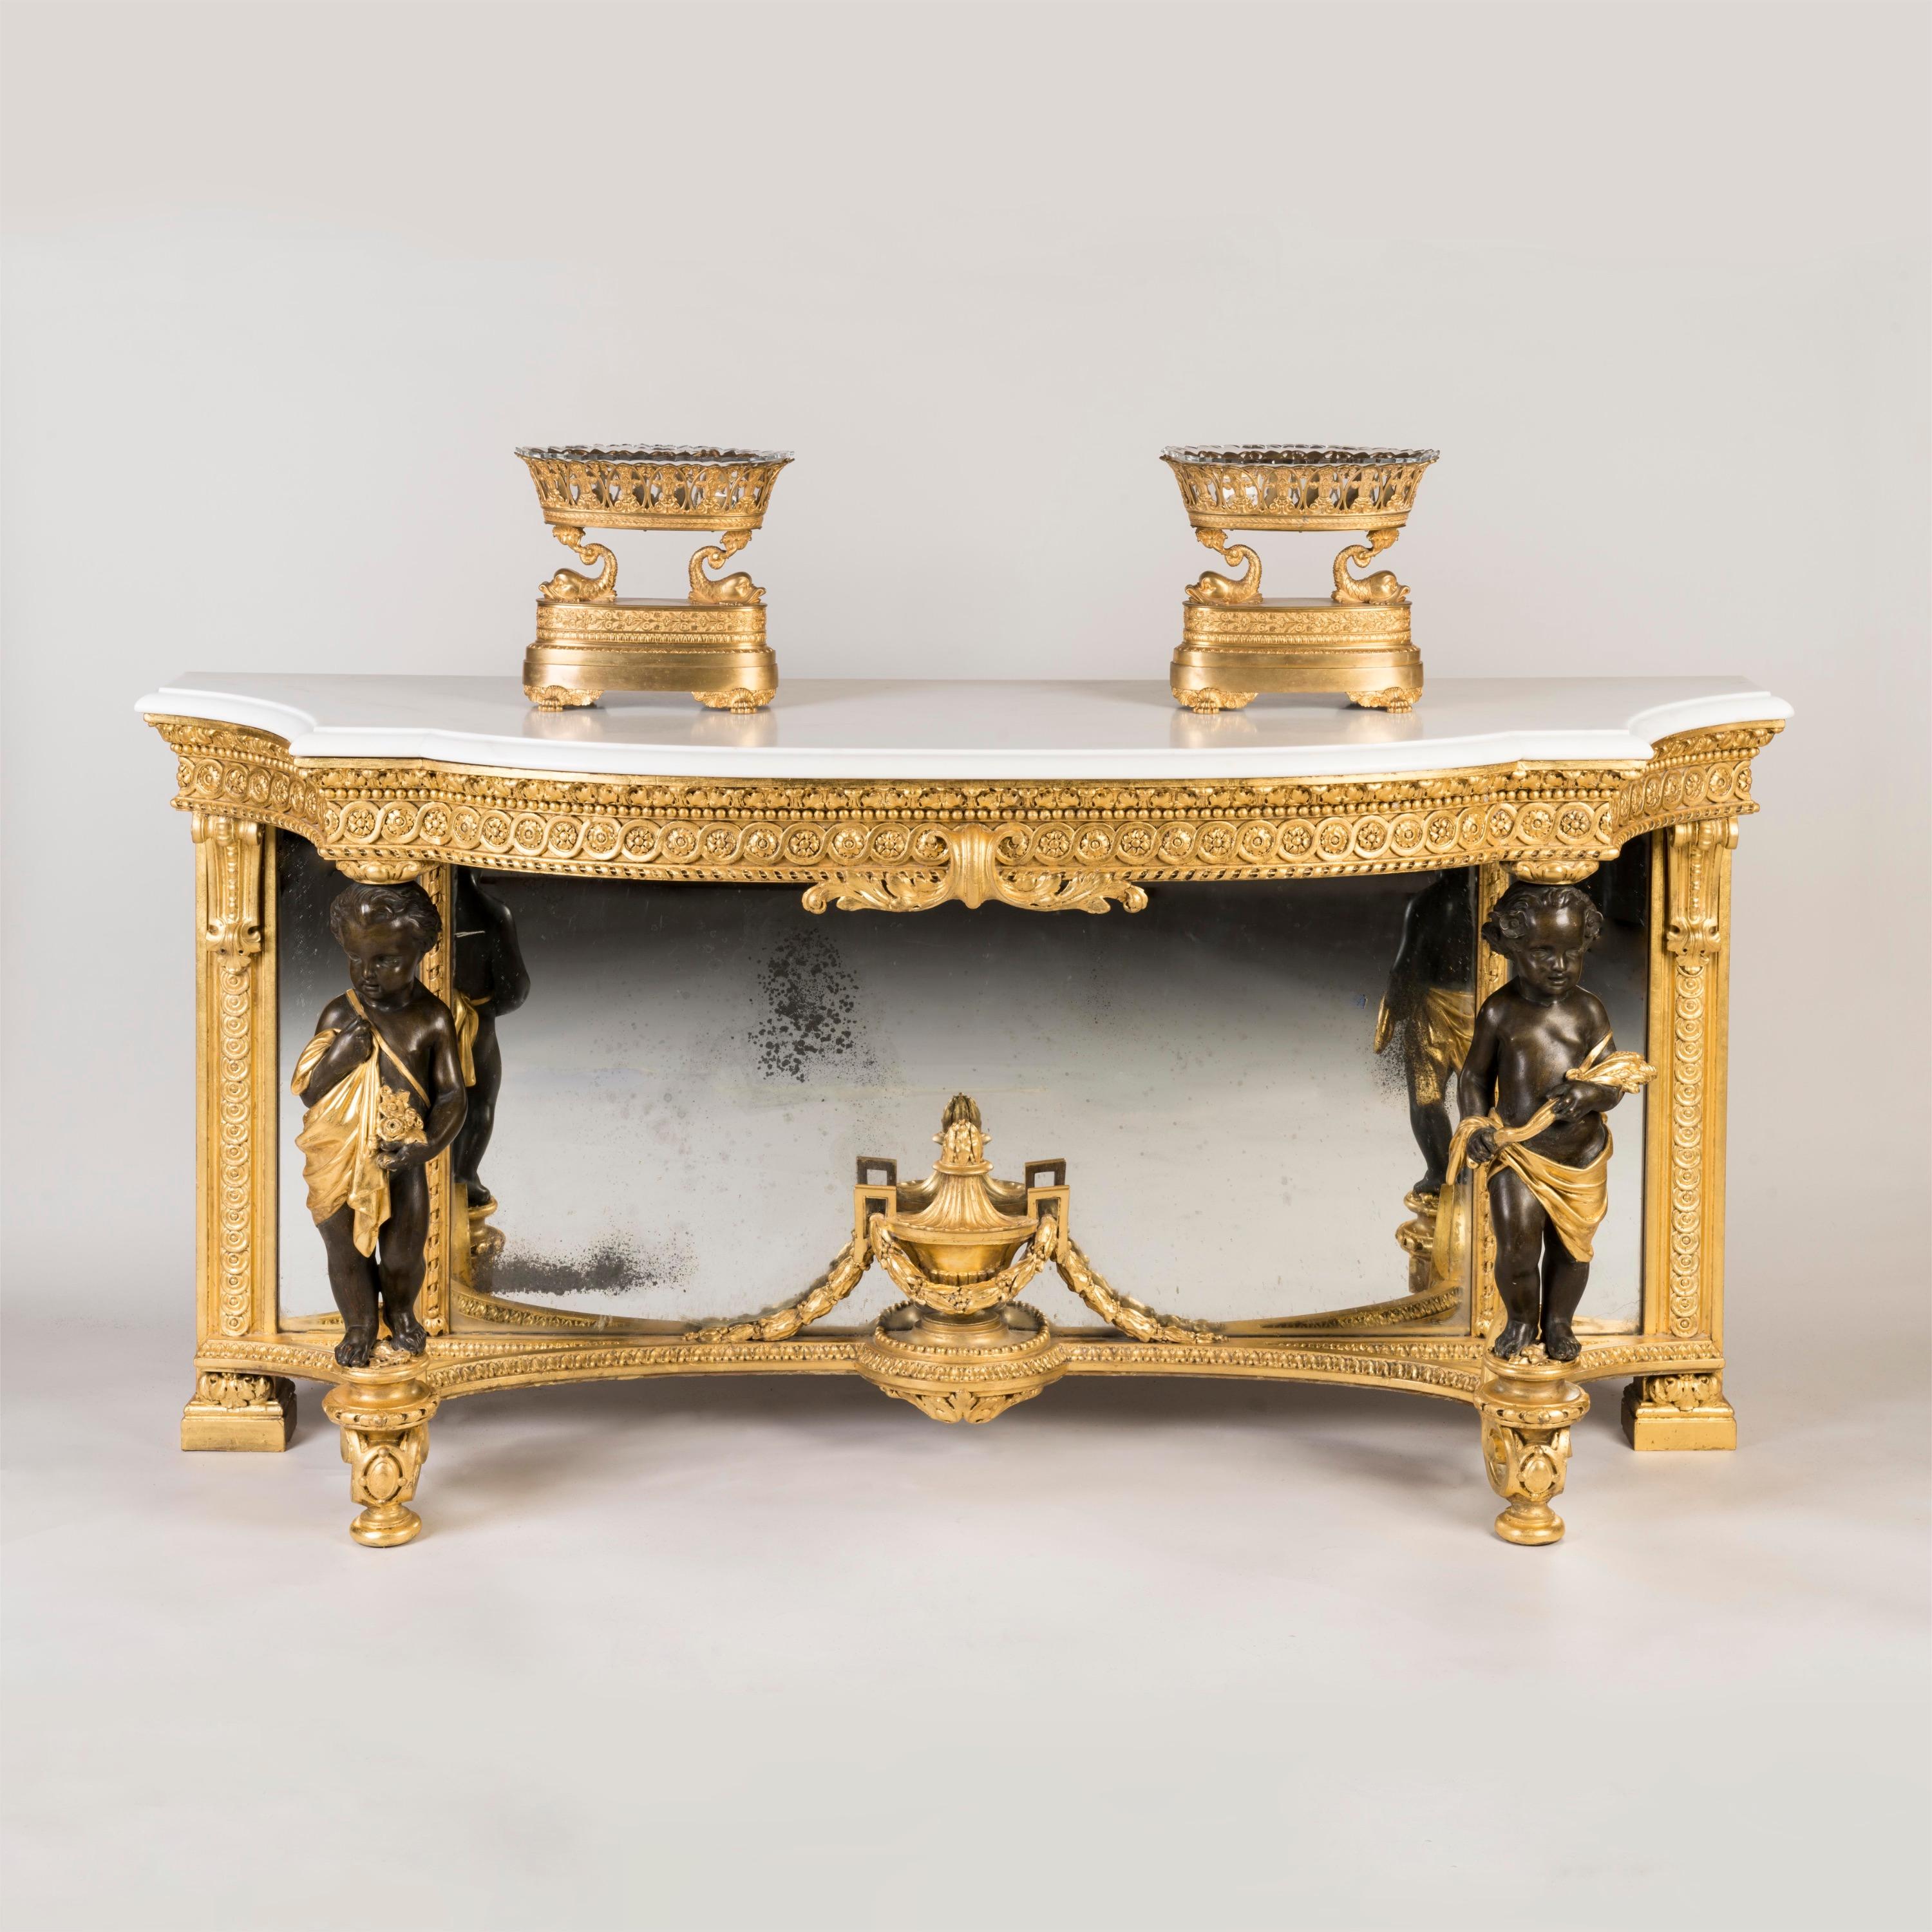 A good console table in the Louis XVI Manner

Gilt wood, with decorated highlights; of arc-en-arbalette form, the white Carrara platform having a thumbnail moulded edge, being supported by a framework of two draped putti, one carrying a posy of